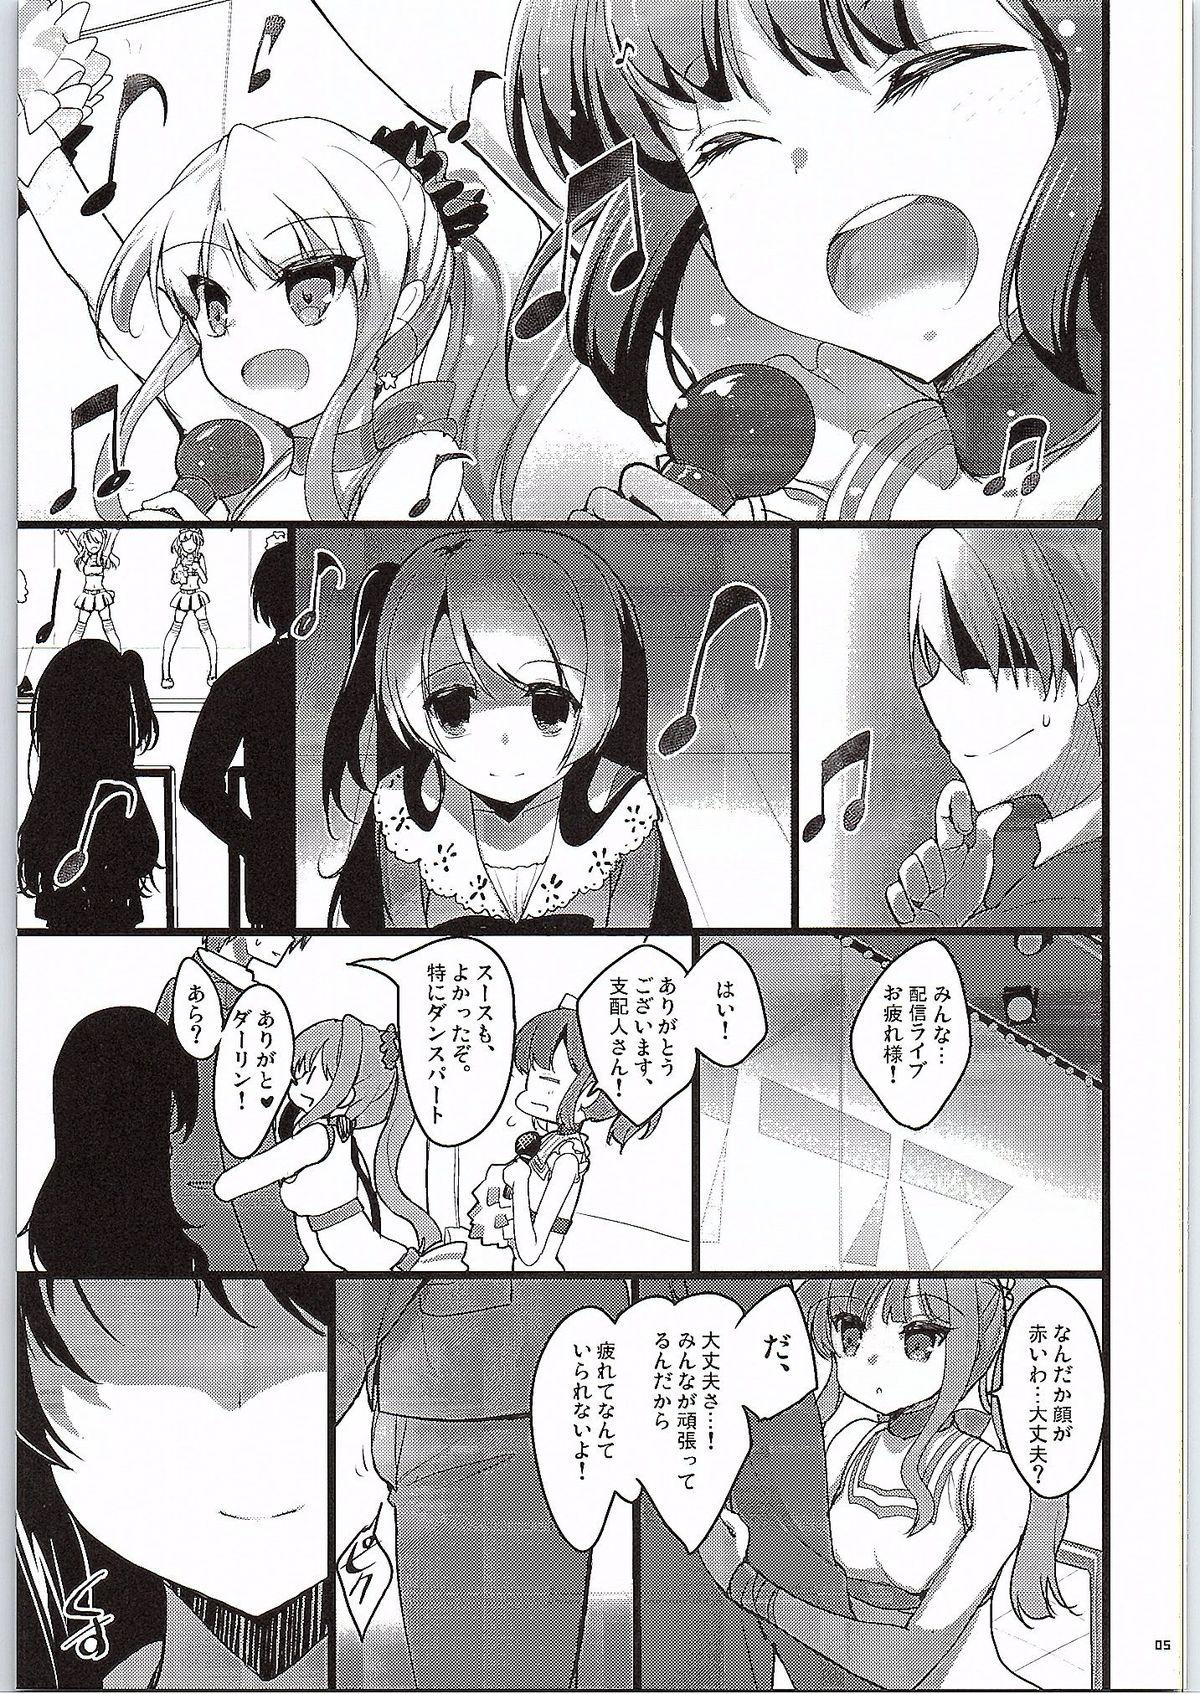 Rough GOOD NIGHTMARE - Tokyo 7th sisters Hard - Page 4